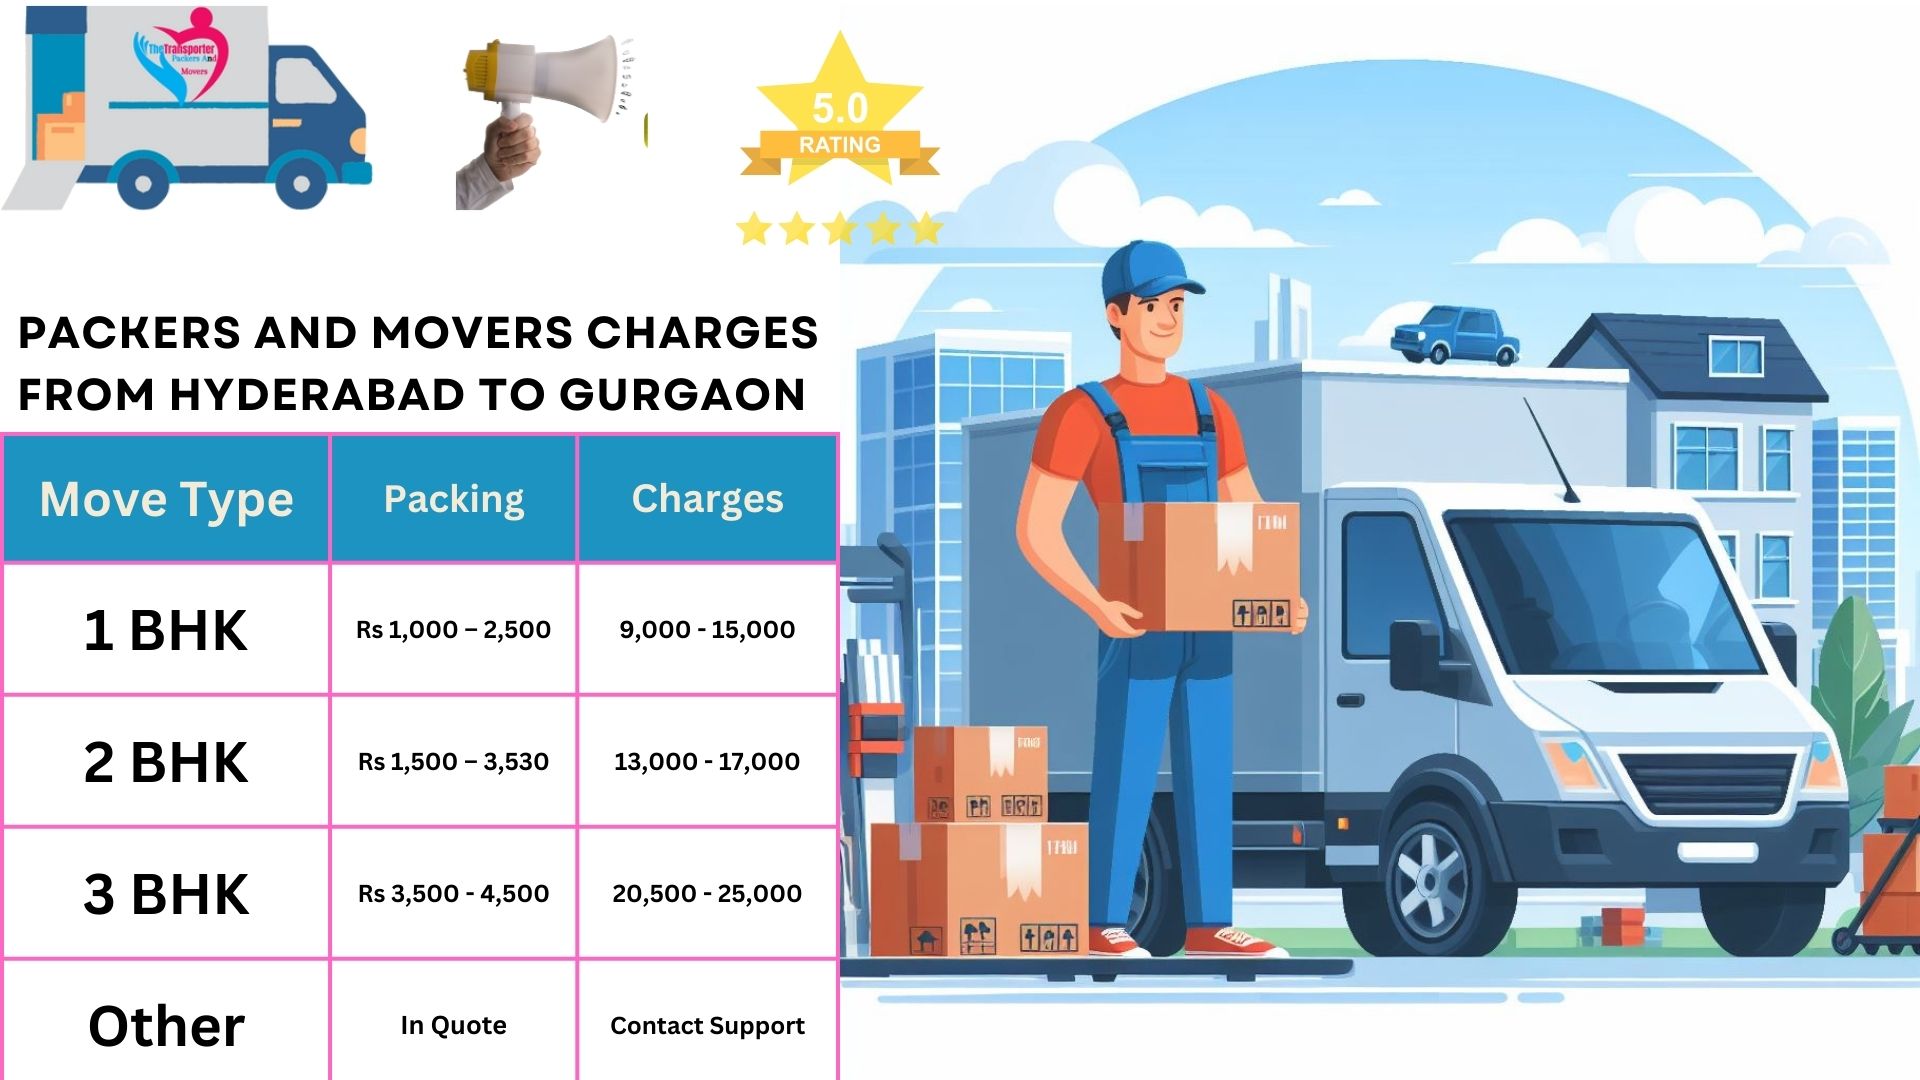 Movers and Packers cost list From Hyderabad to Gurgaon